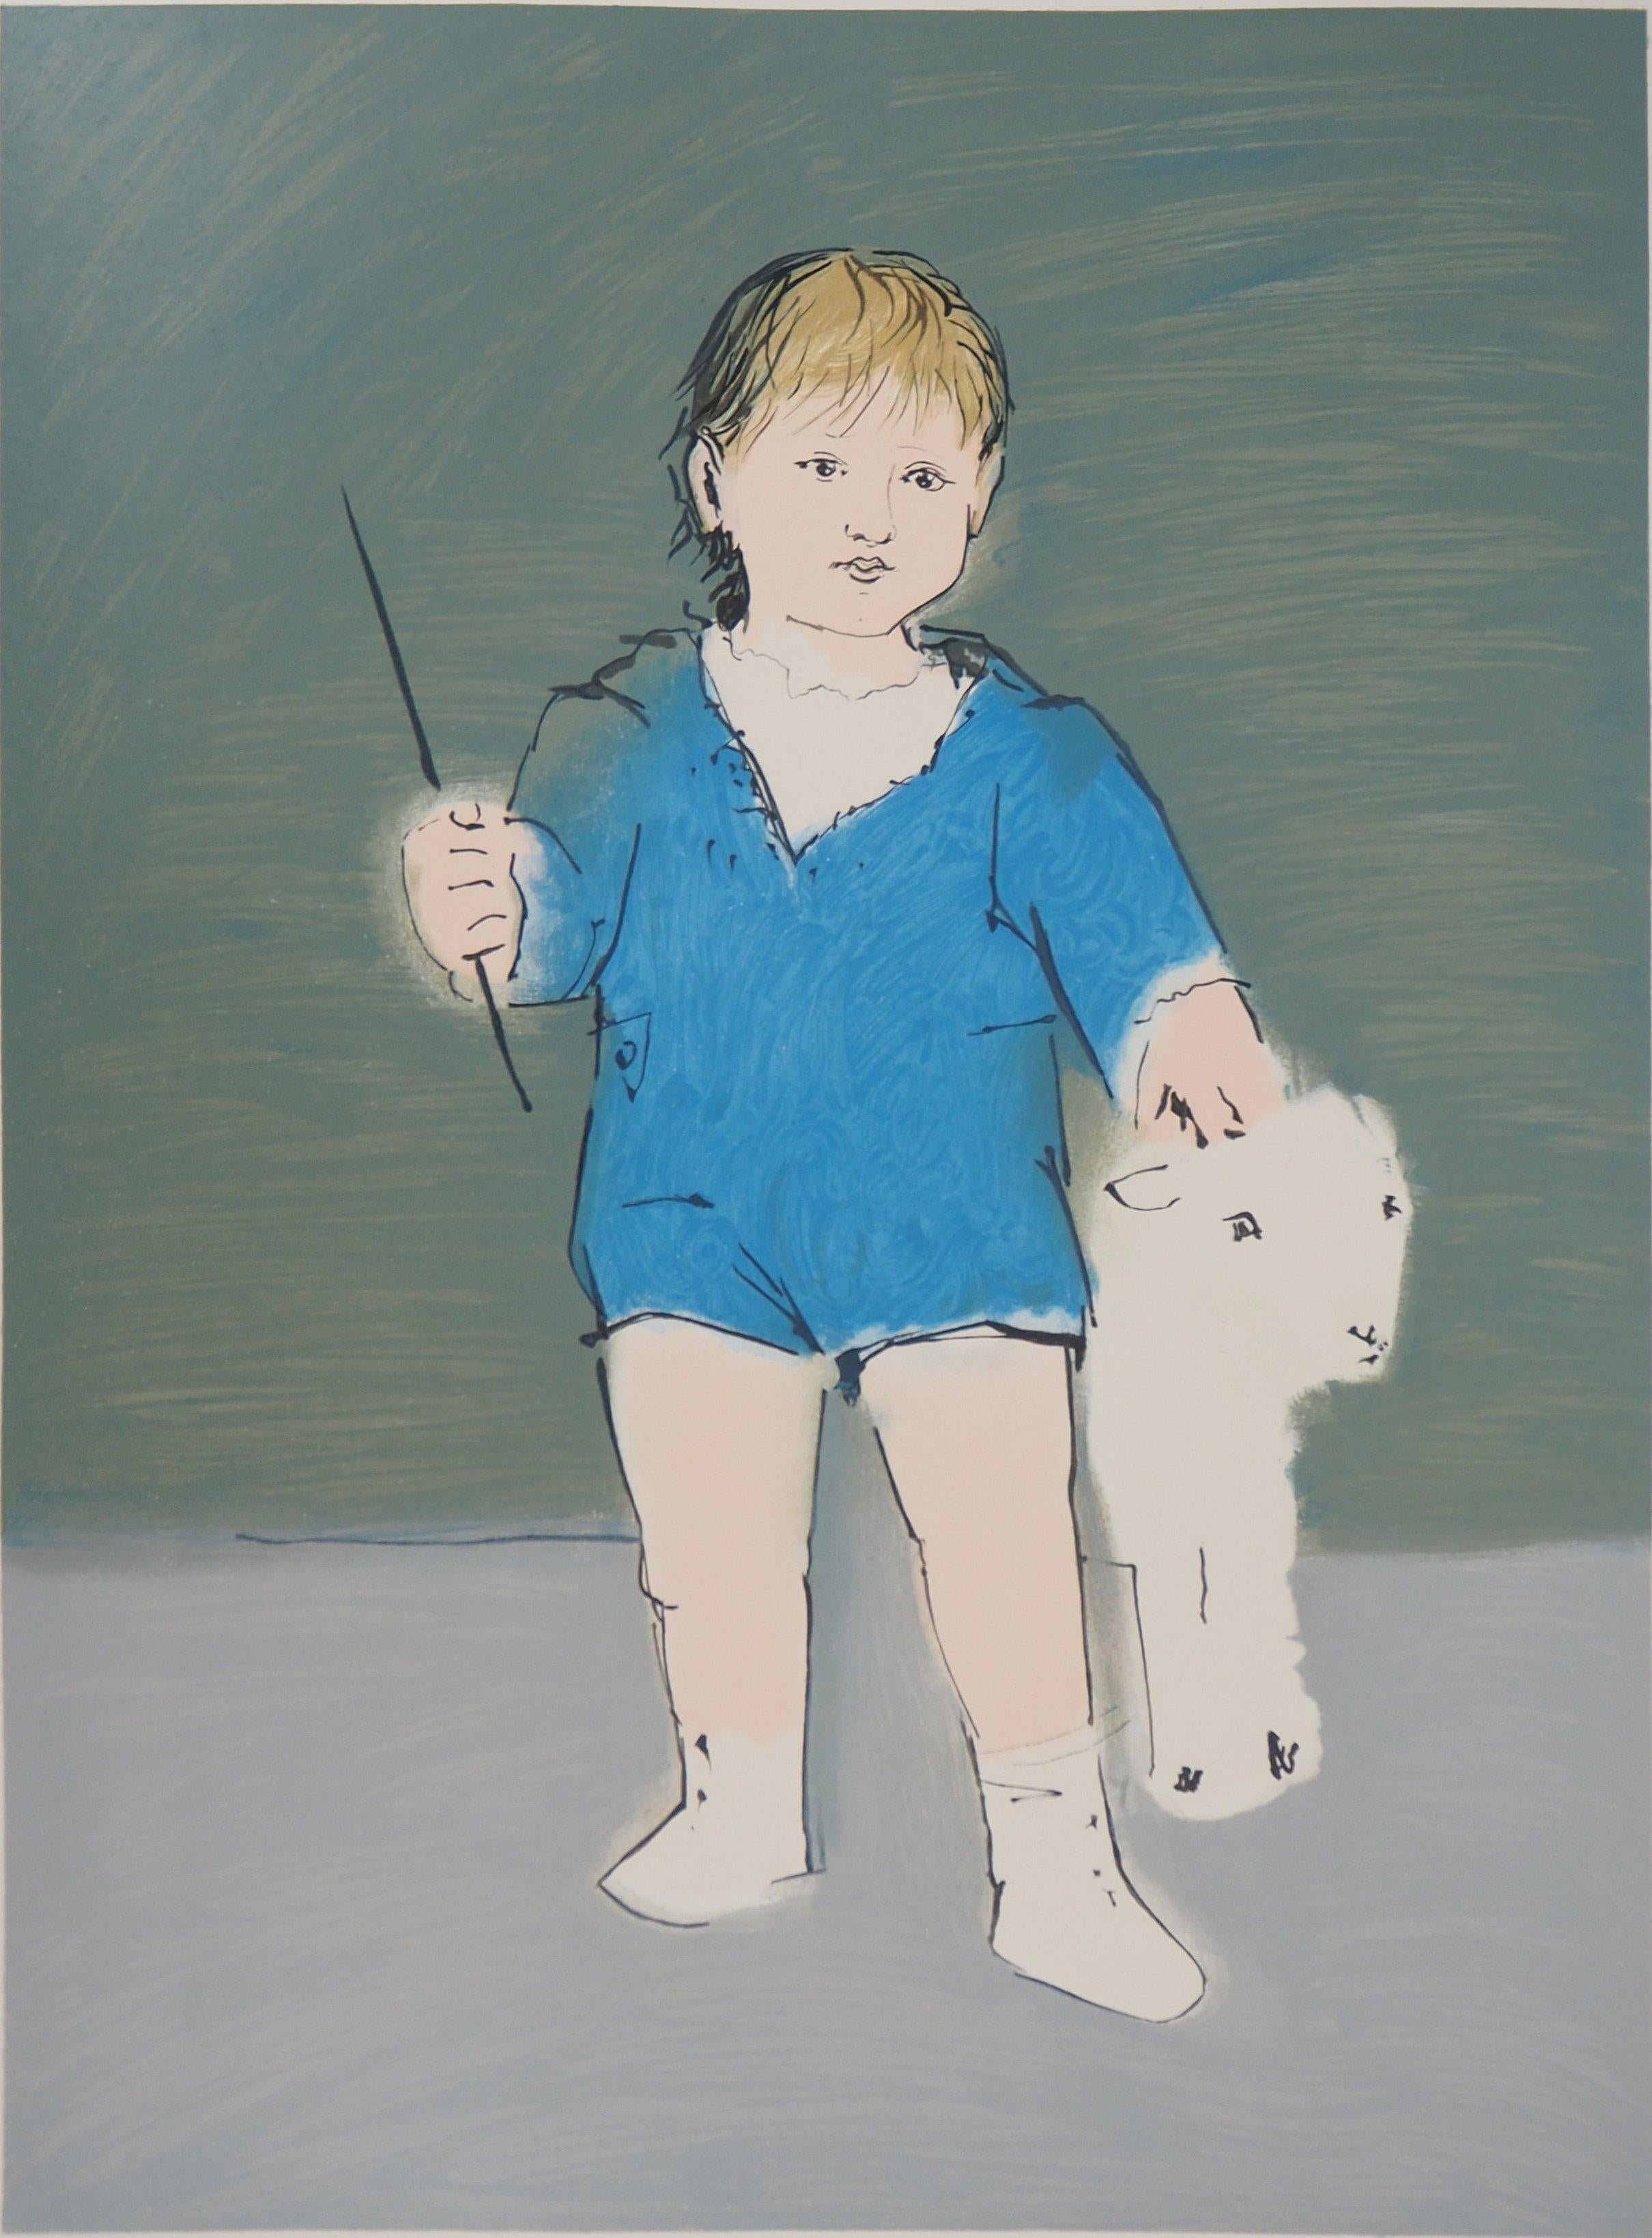 Child with a Lamb - Lithograph (Mourlot) - Print by Pablo Picasso